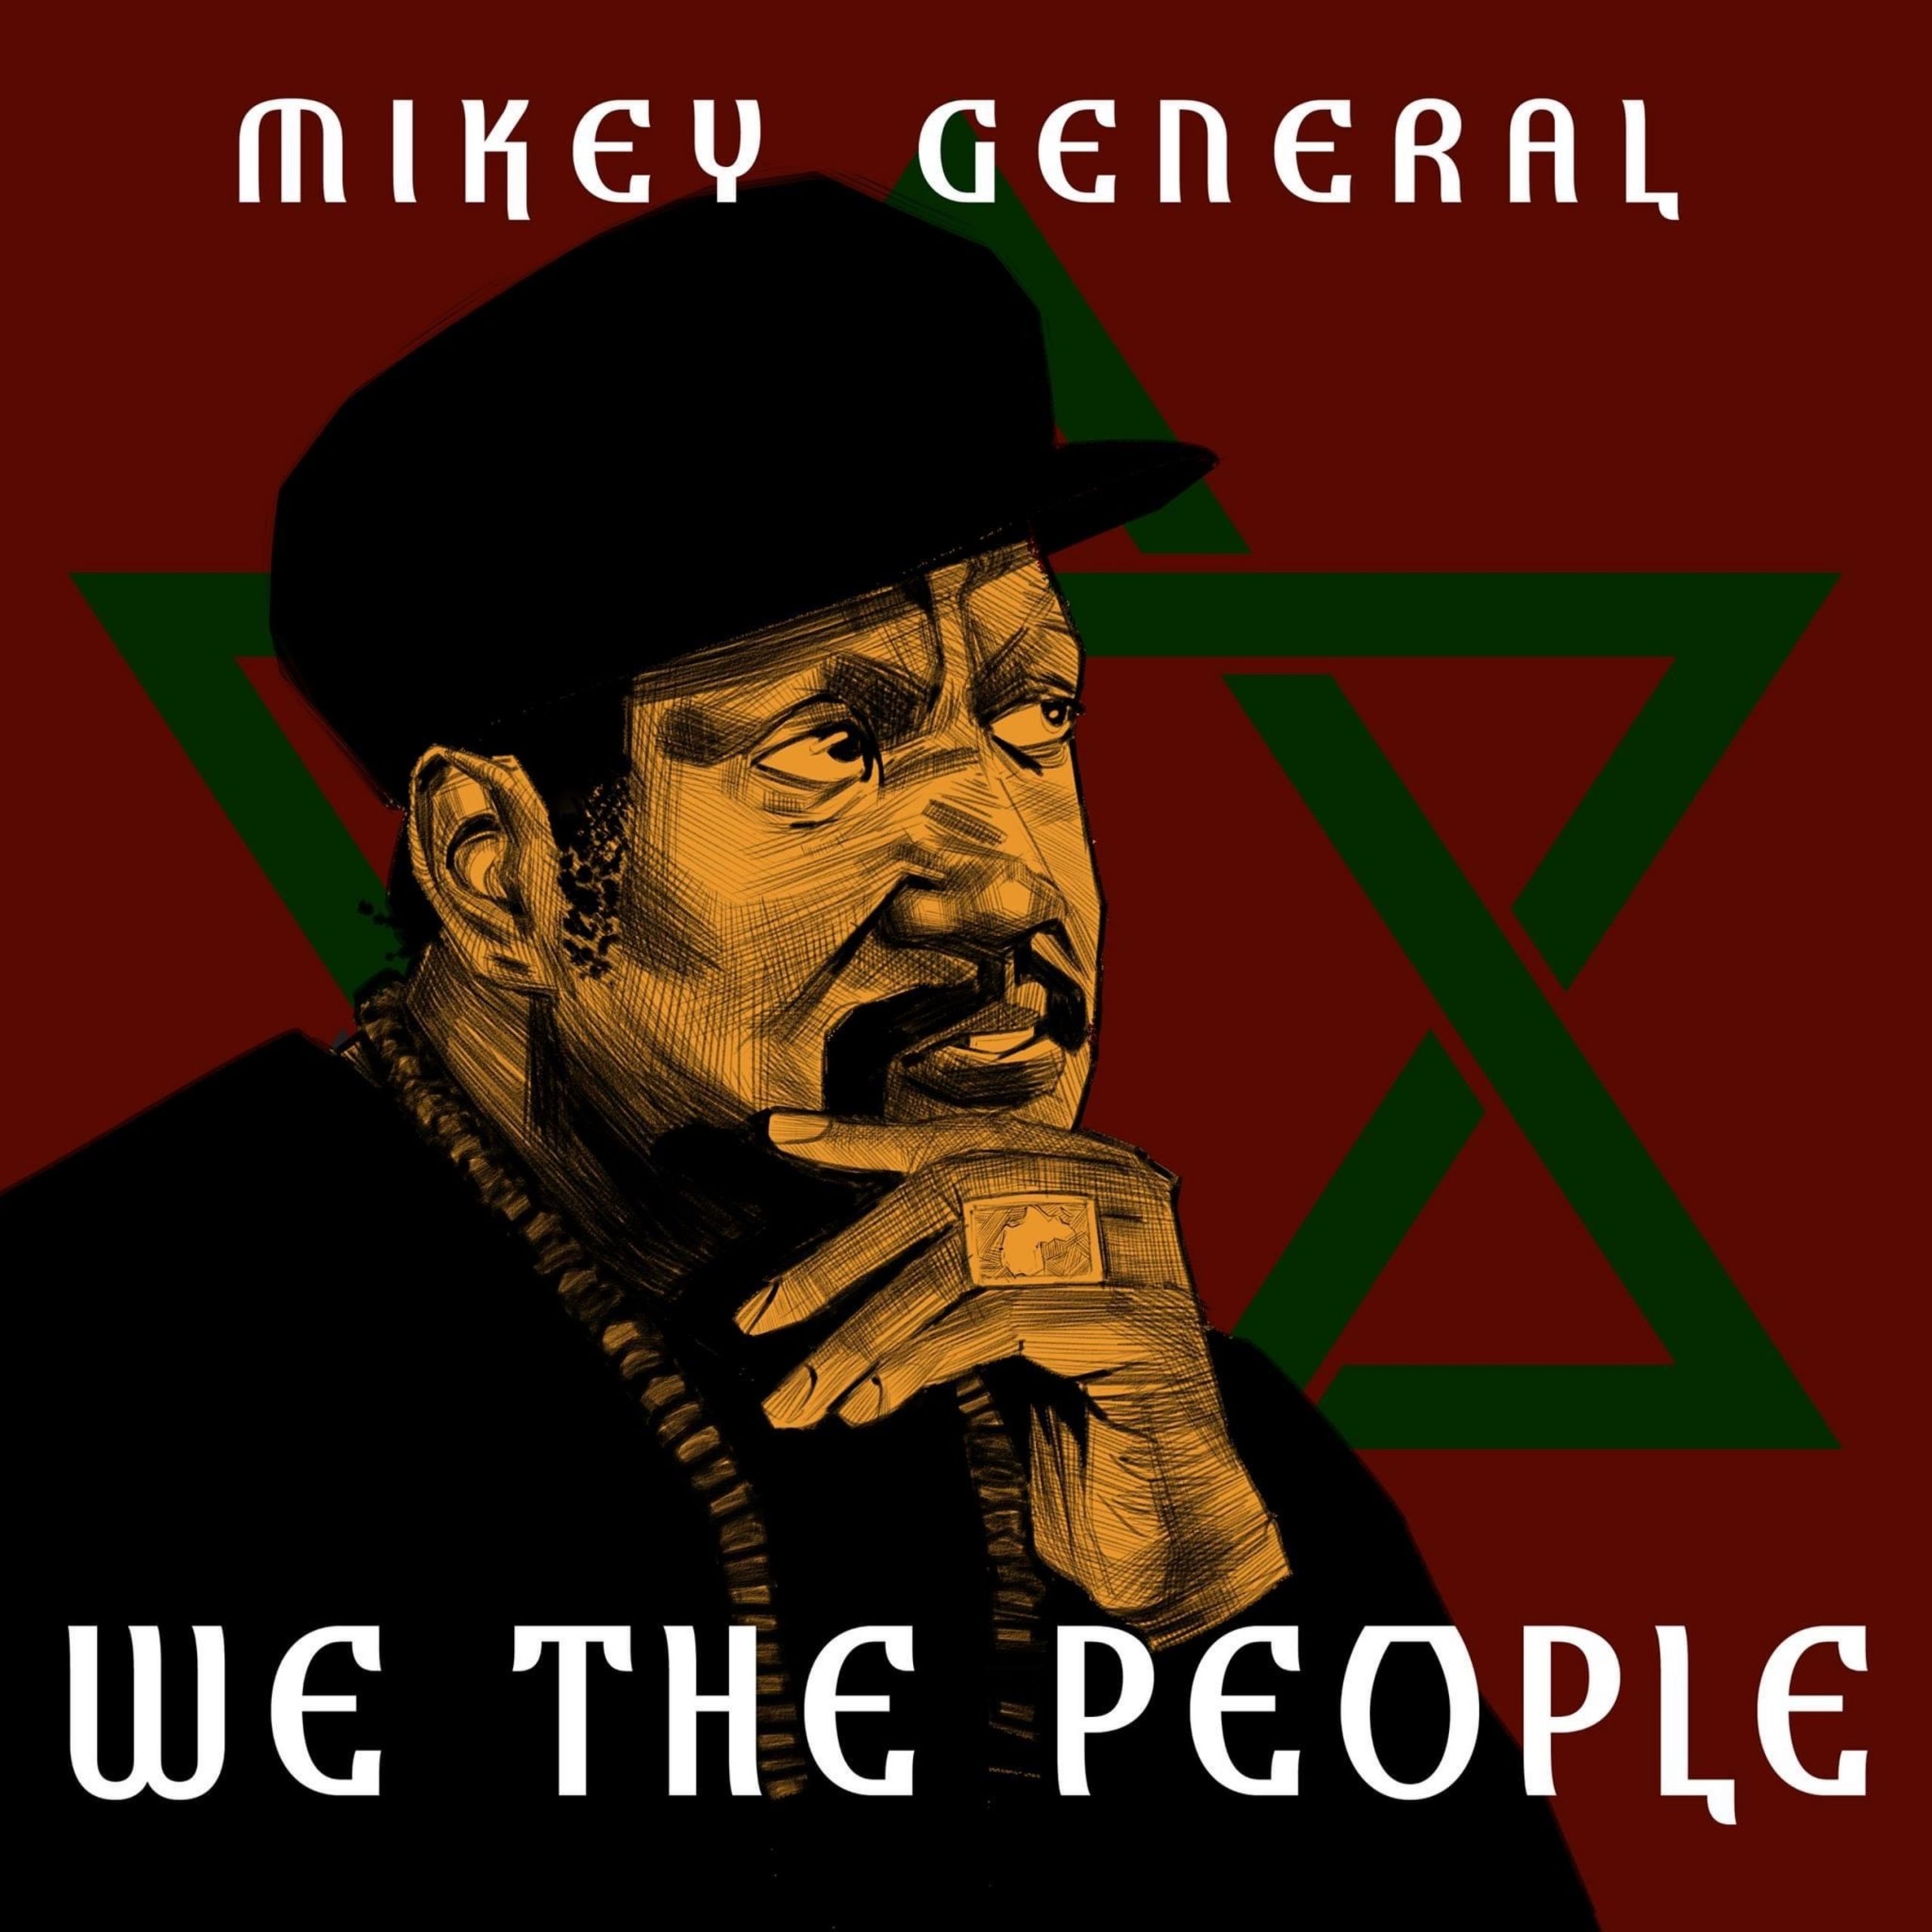 Mikey General's We The People